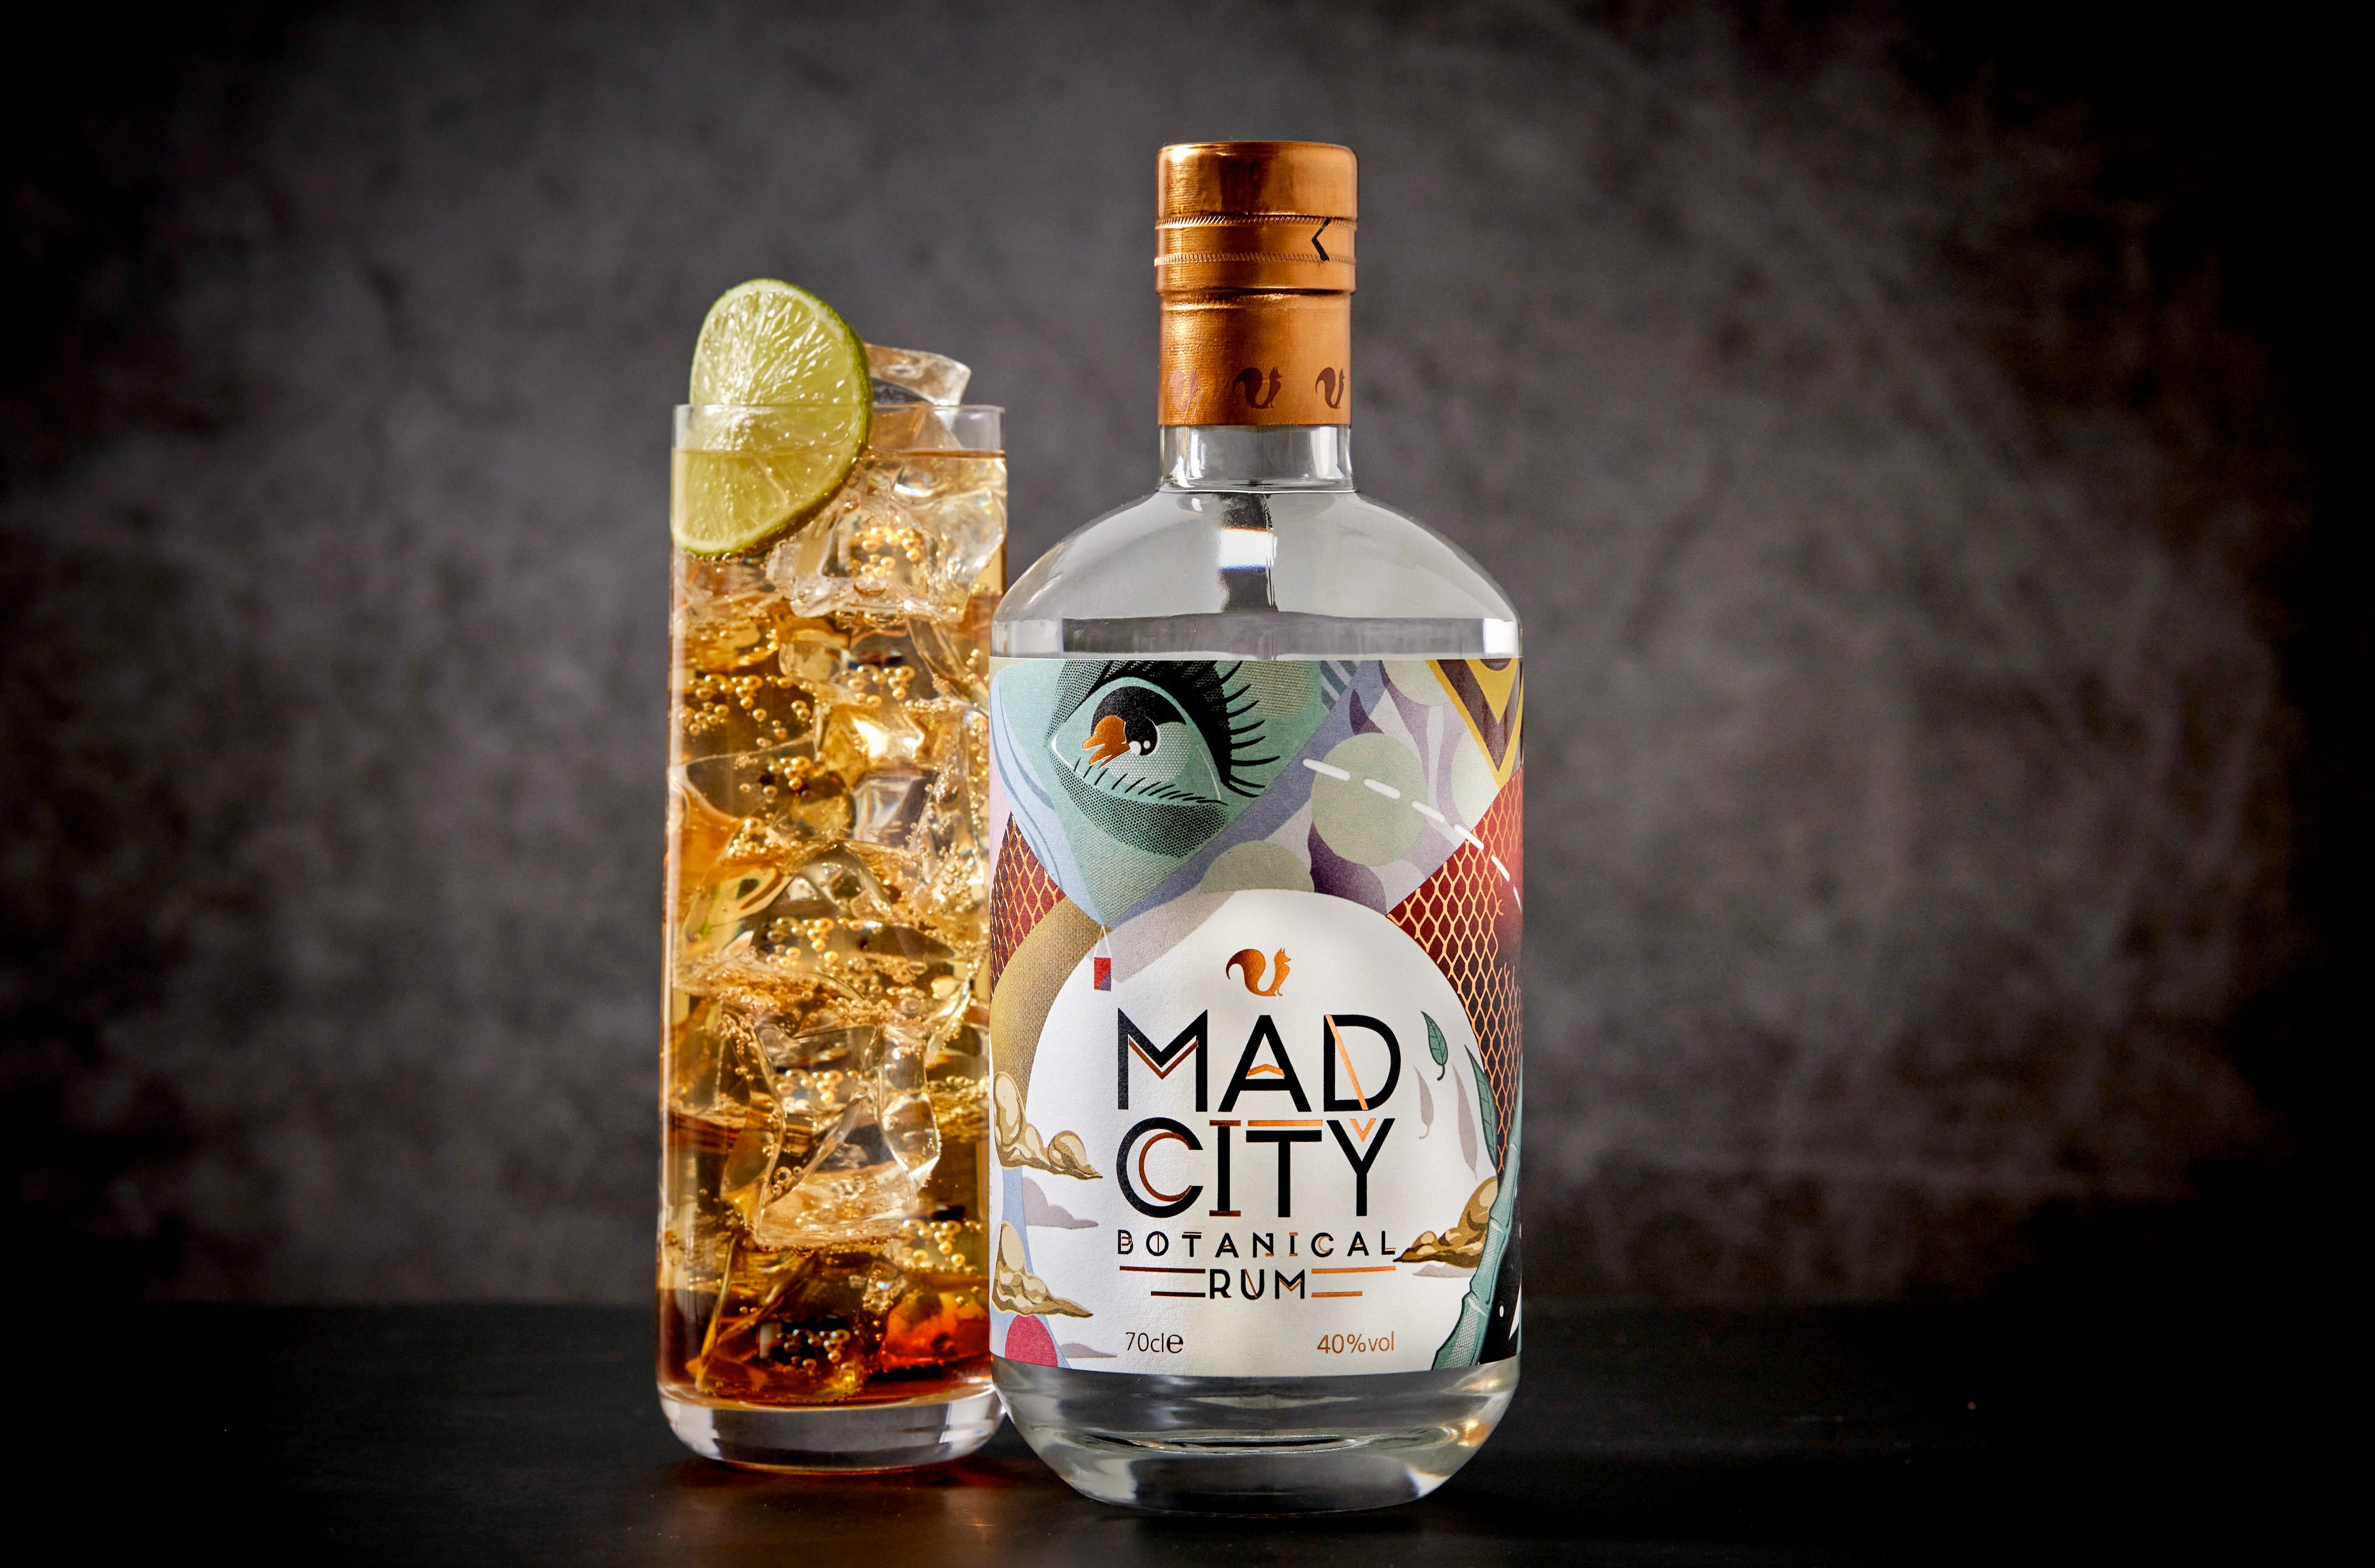 White Botanical Rum - Welcome to Mad City!